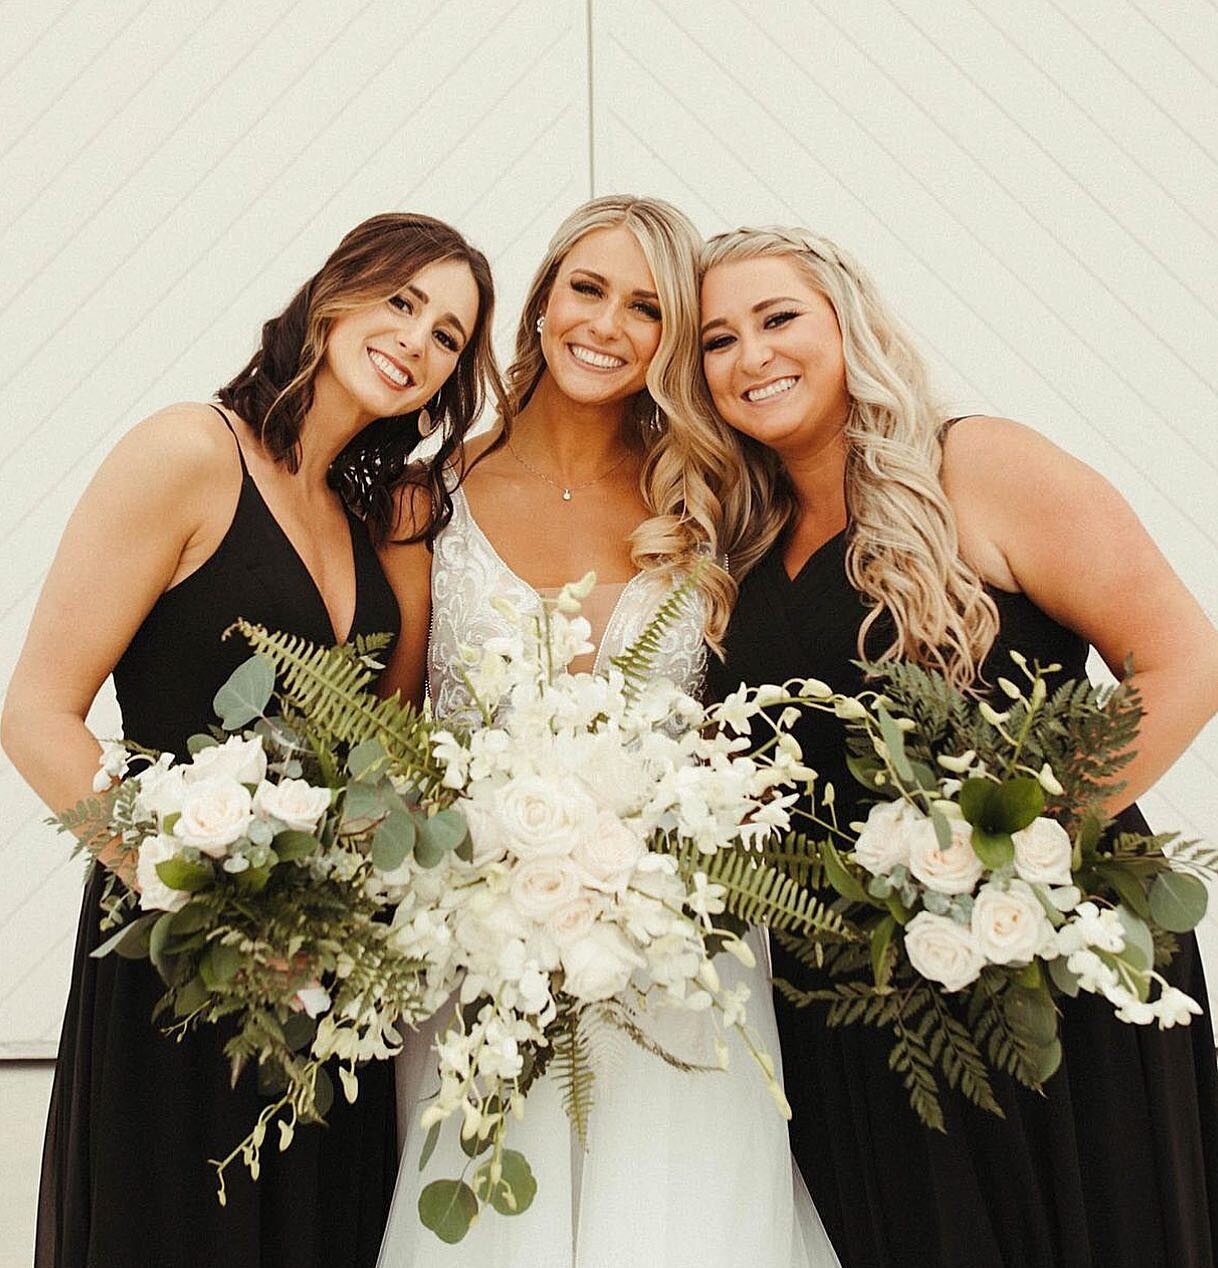 Wedding season is here!! Let us help make your big day even more special 🤍

Hair &amp; makeup by @hilary.embry, @hairmagicmace, @a.buller.beauty, and @ssaskinmakeupartistry